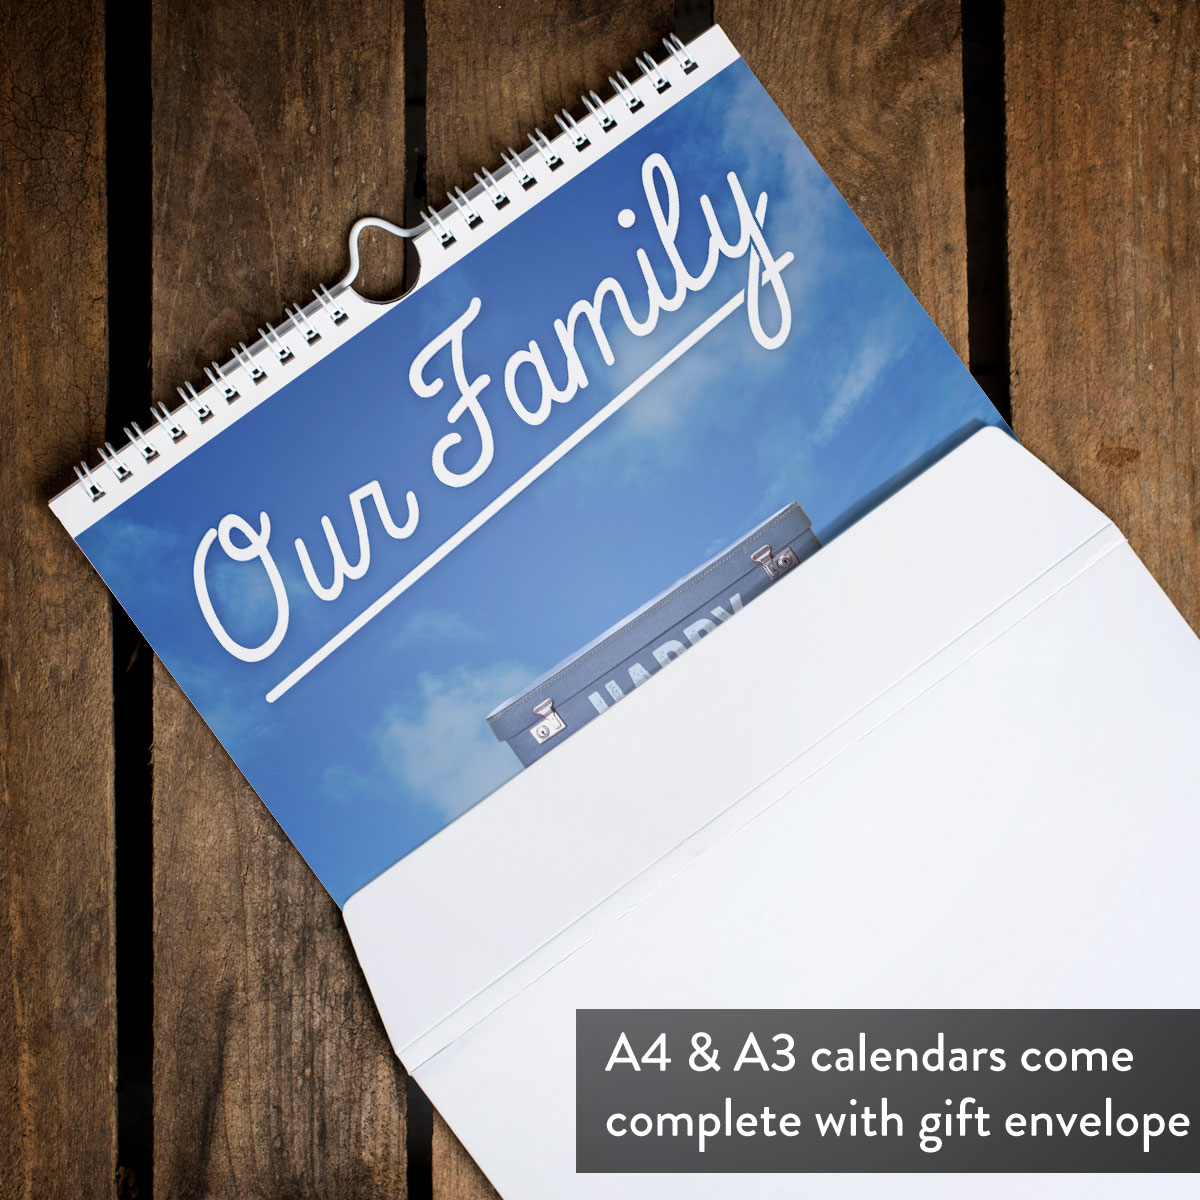 Personalised Our Family Calendar - 7th Edition